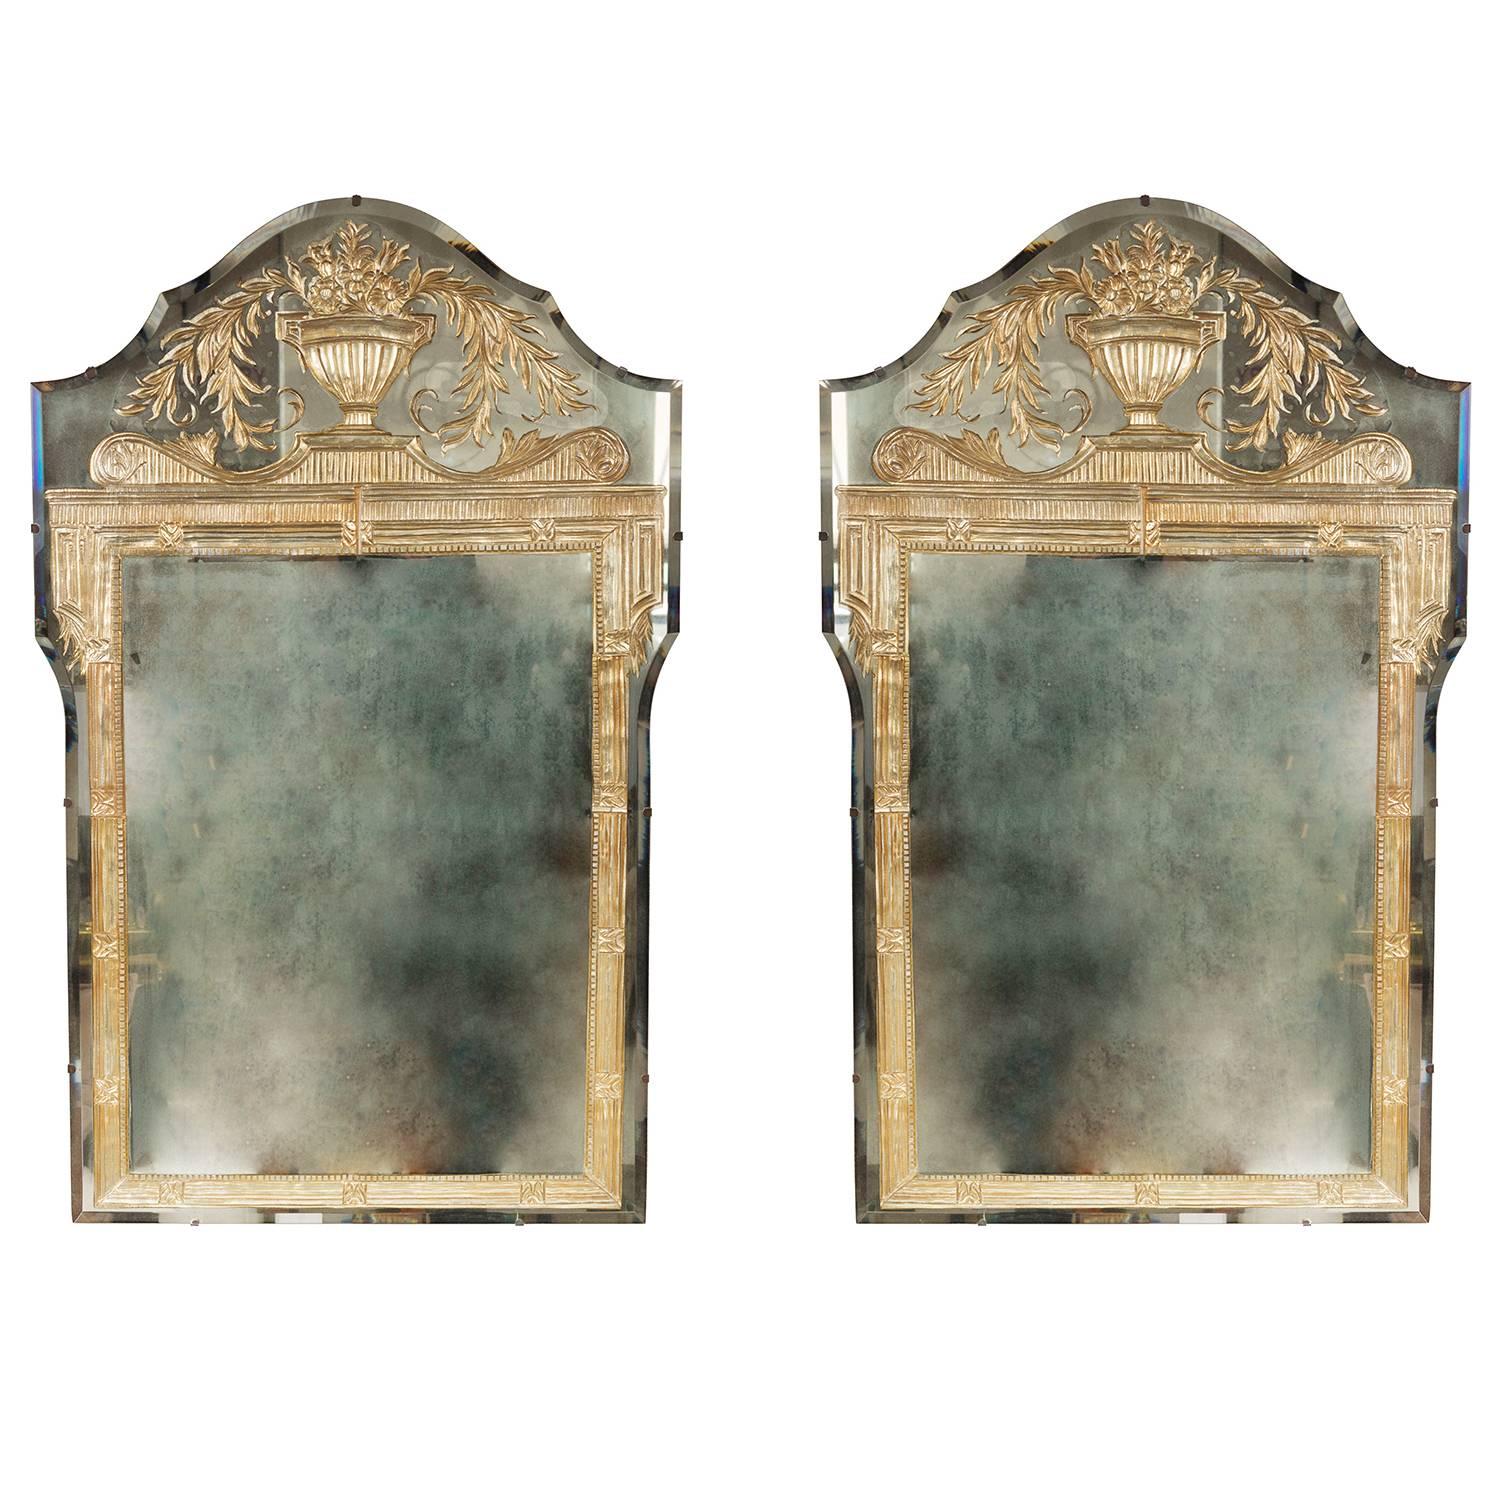 Pair of Striking Reverse Etched and Decorated Mirrors